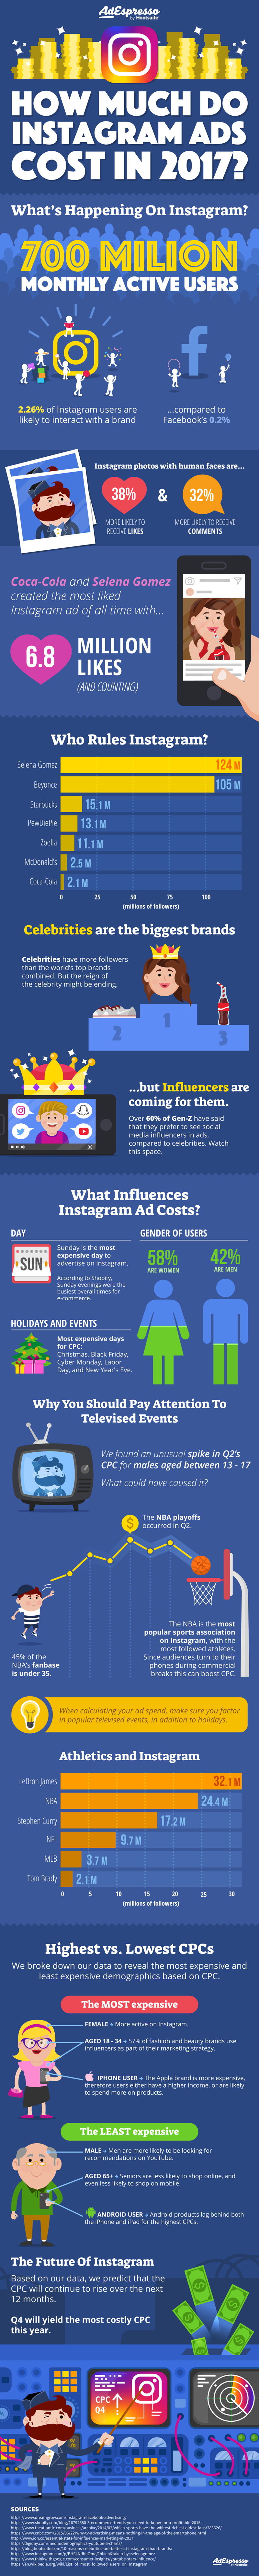 instagram-ads-cost-infographic-final.png